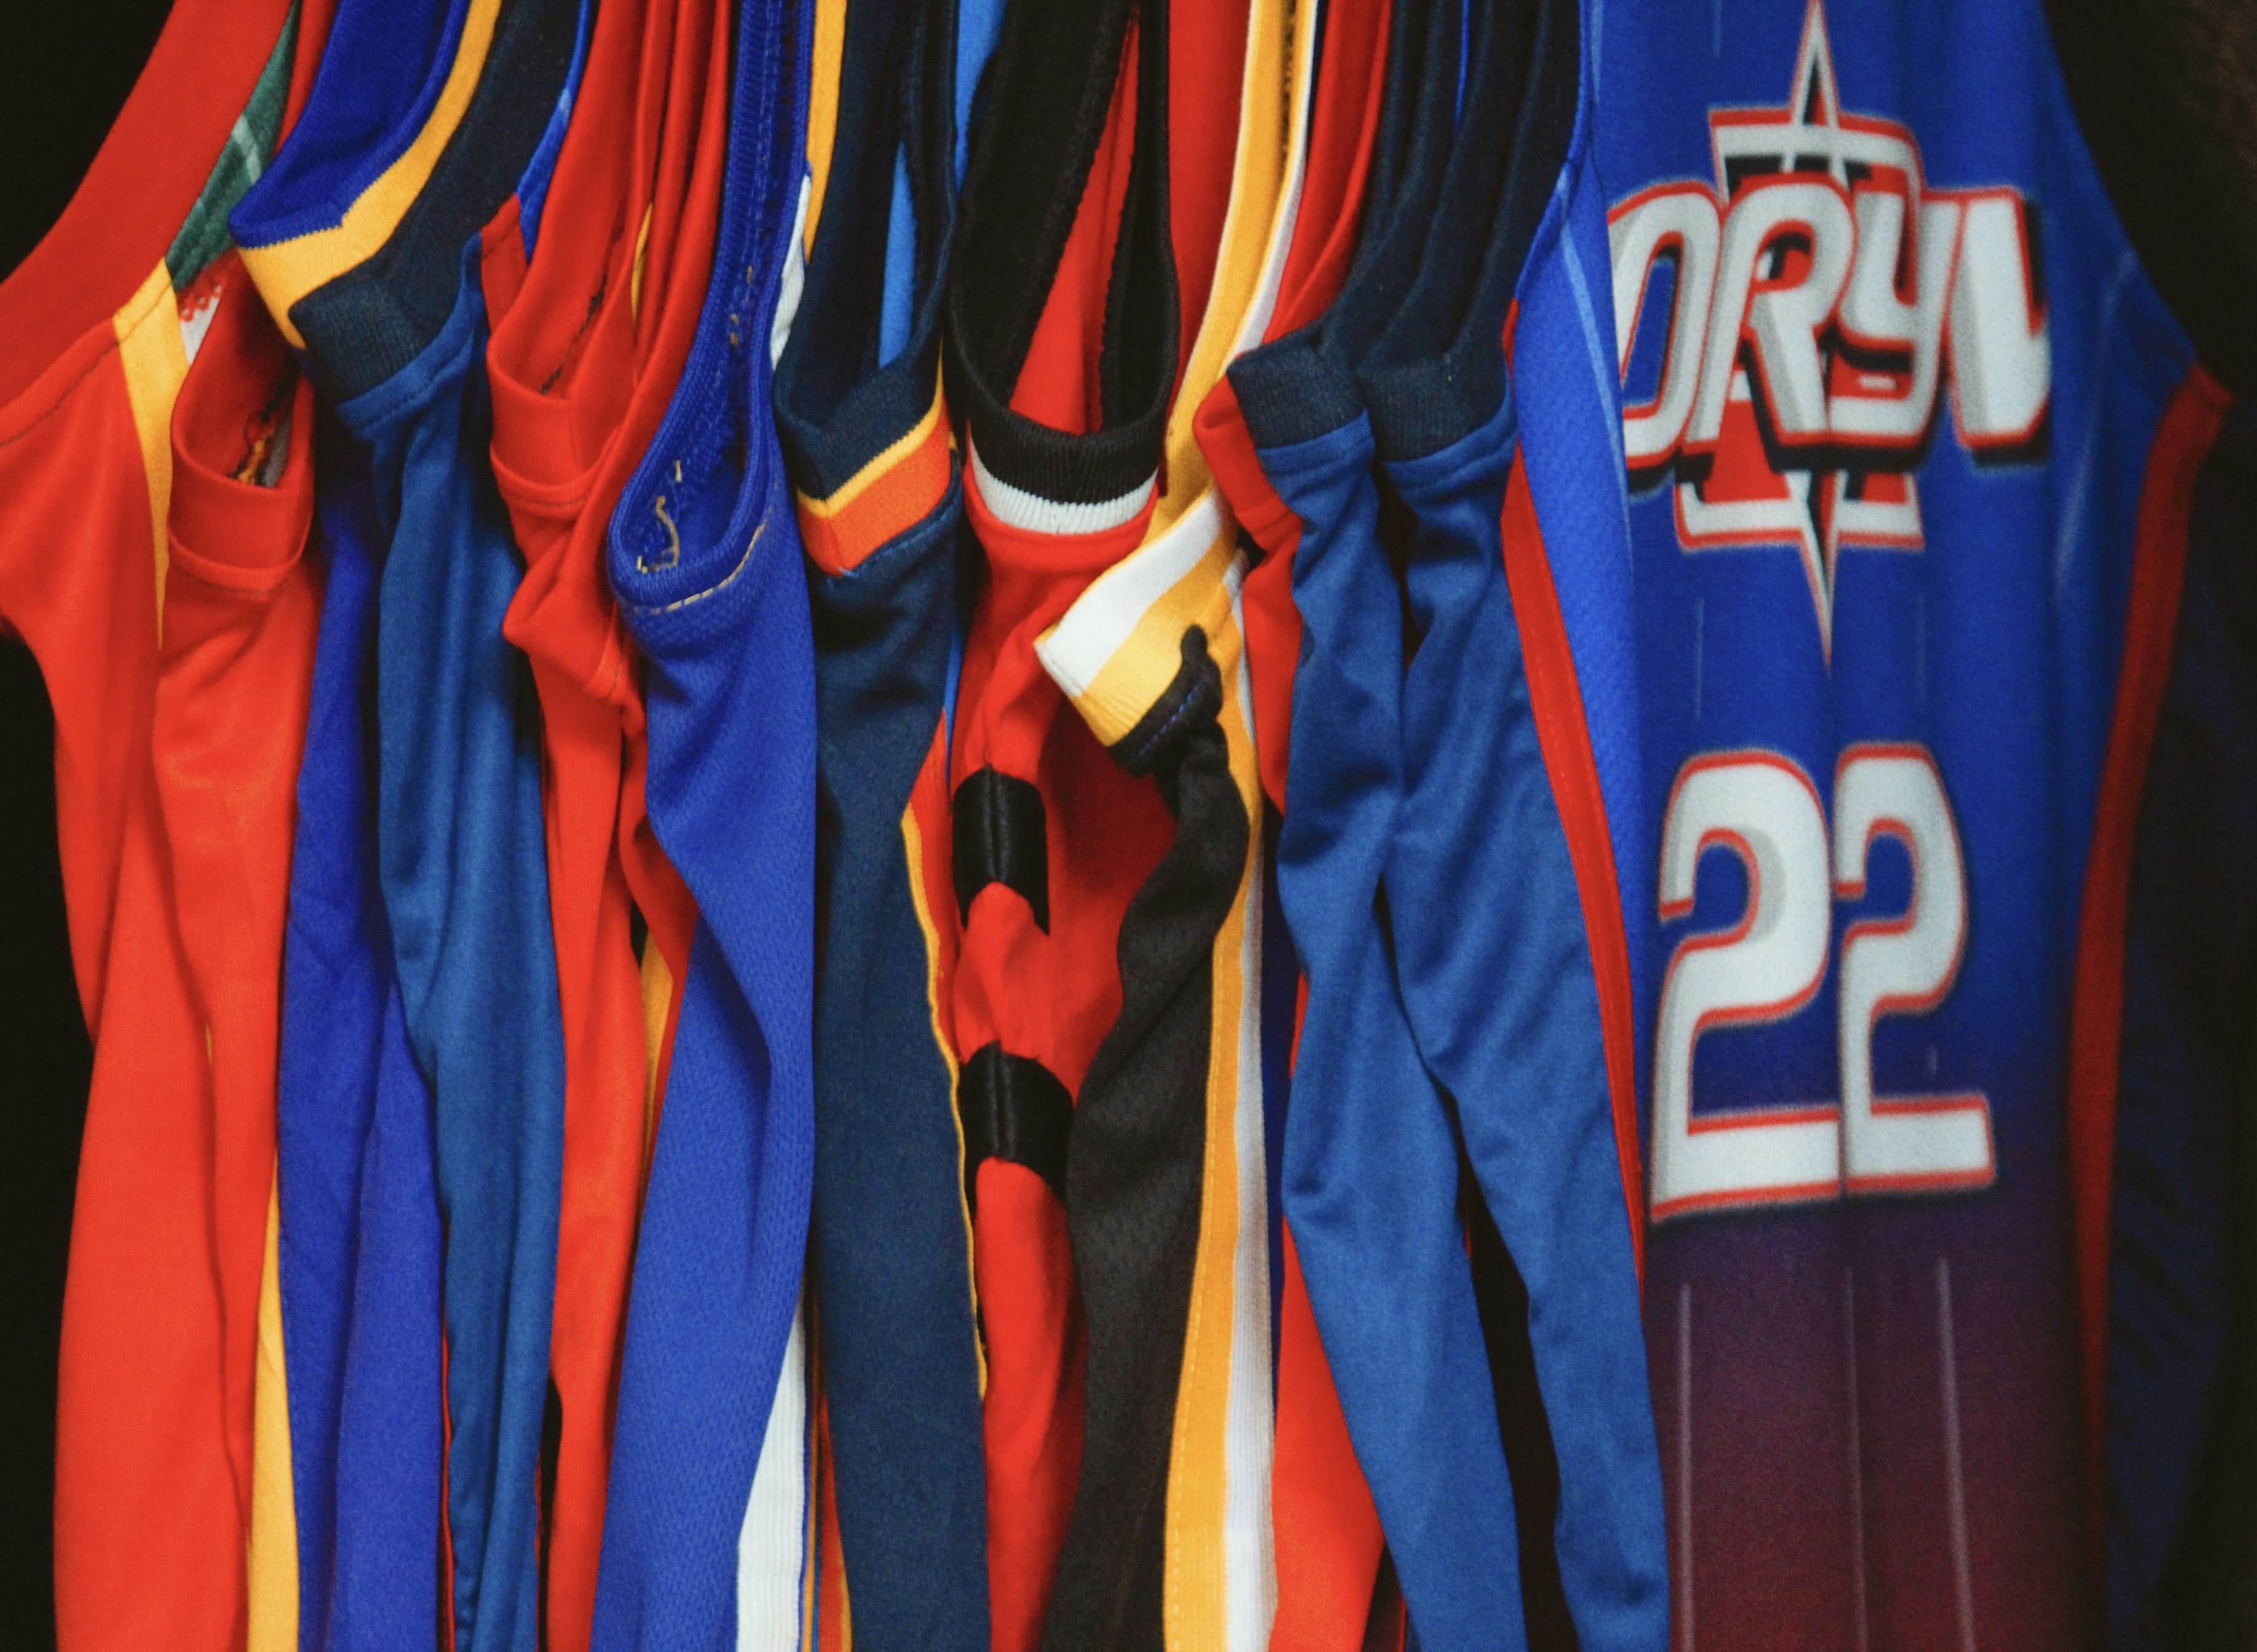 NBA Basketball jersey collections. Picture by Abhay Siby Mathew.